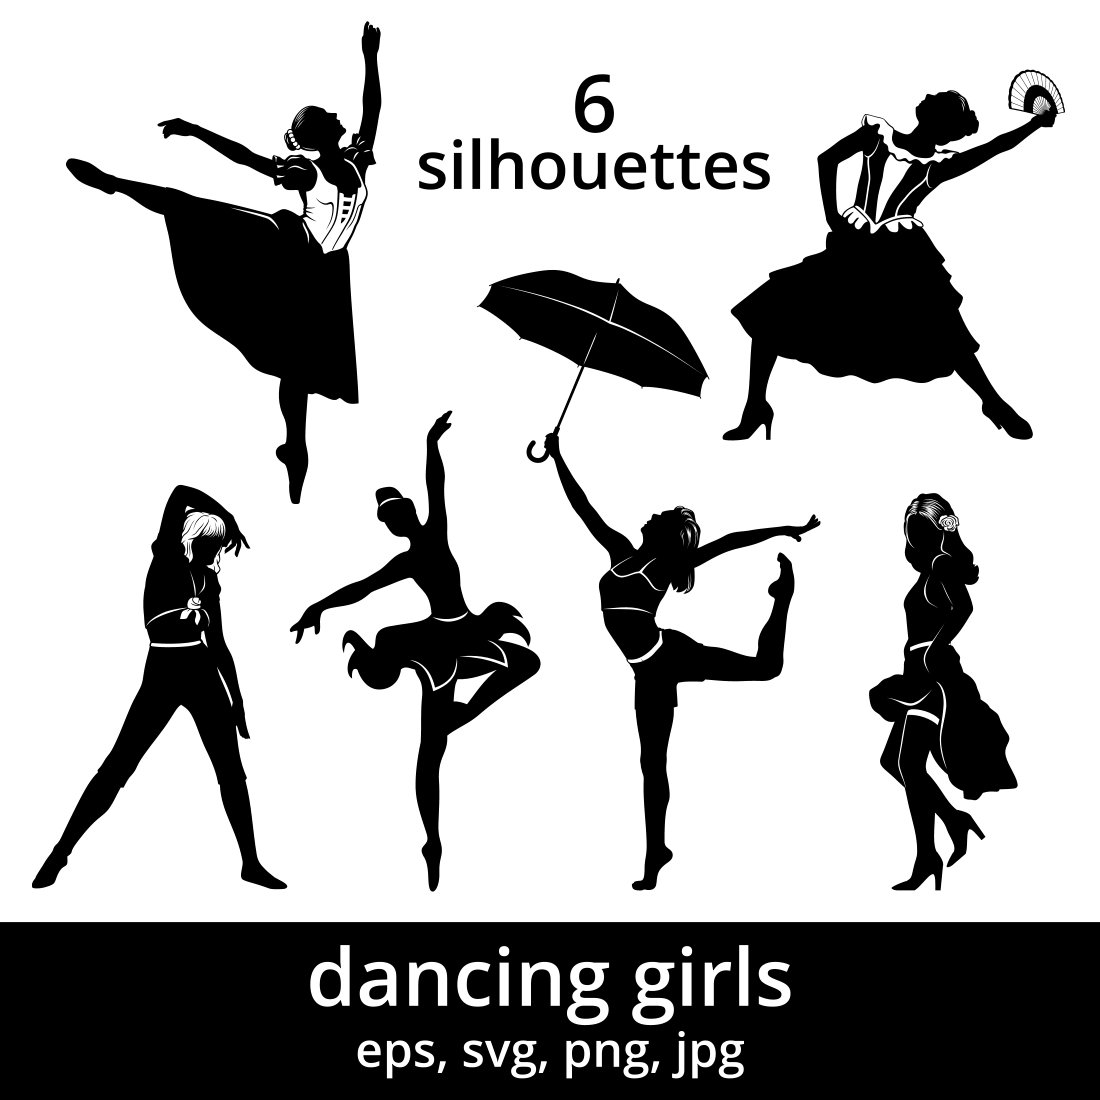 Dancing Girls Silhouettes SVG main cover.